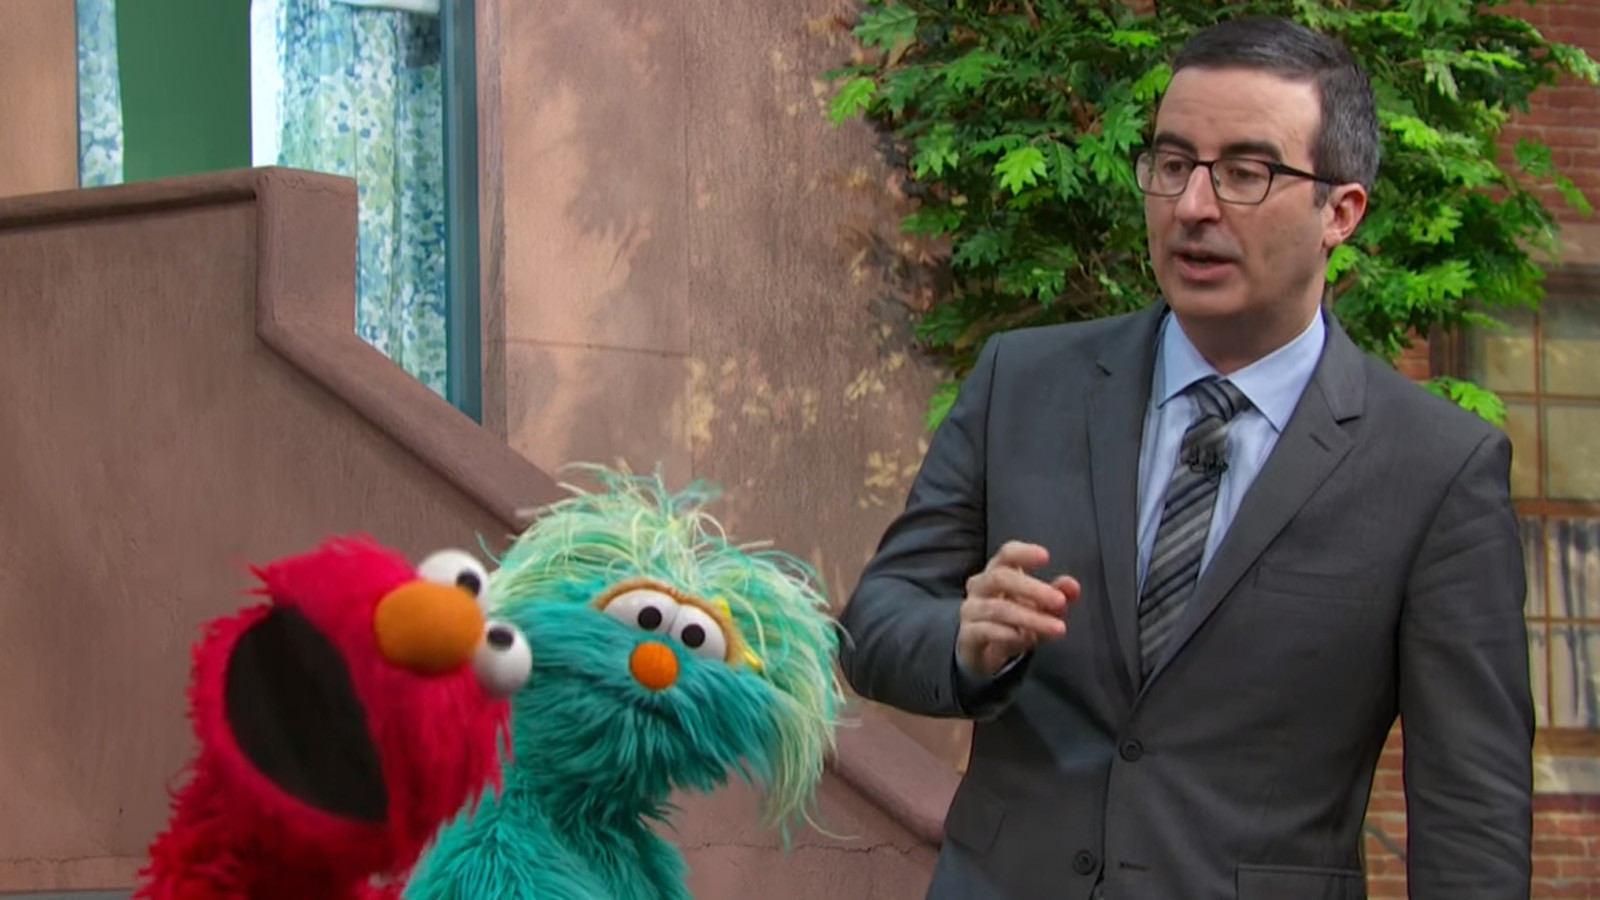 John Oliver calls attention to lead poisoning with help from 'Sesame Street ...